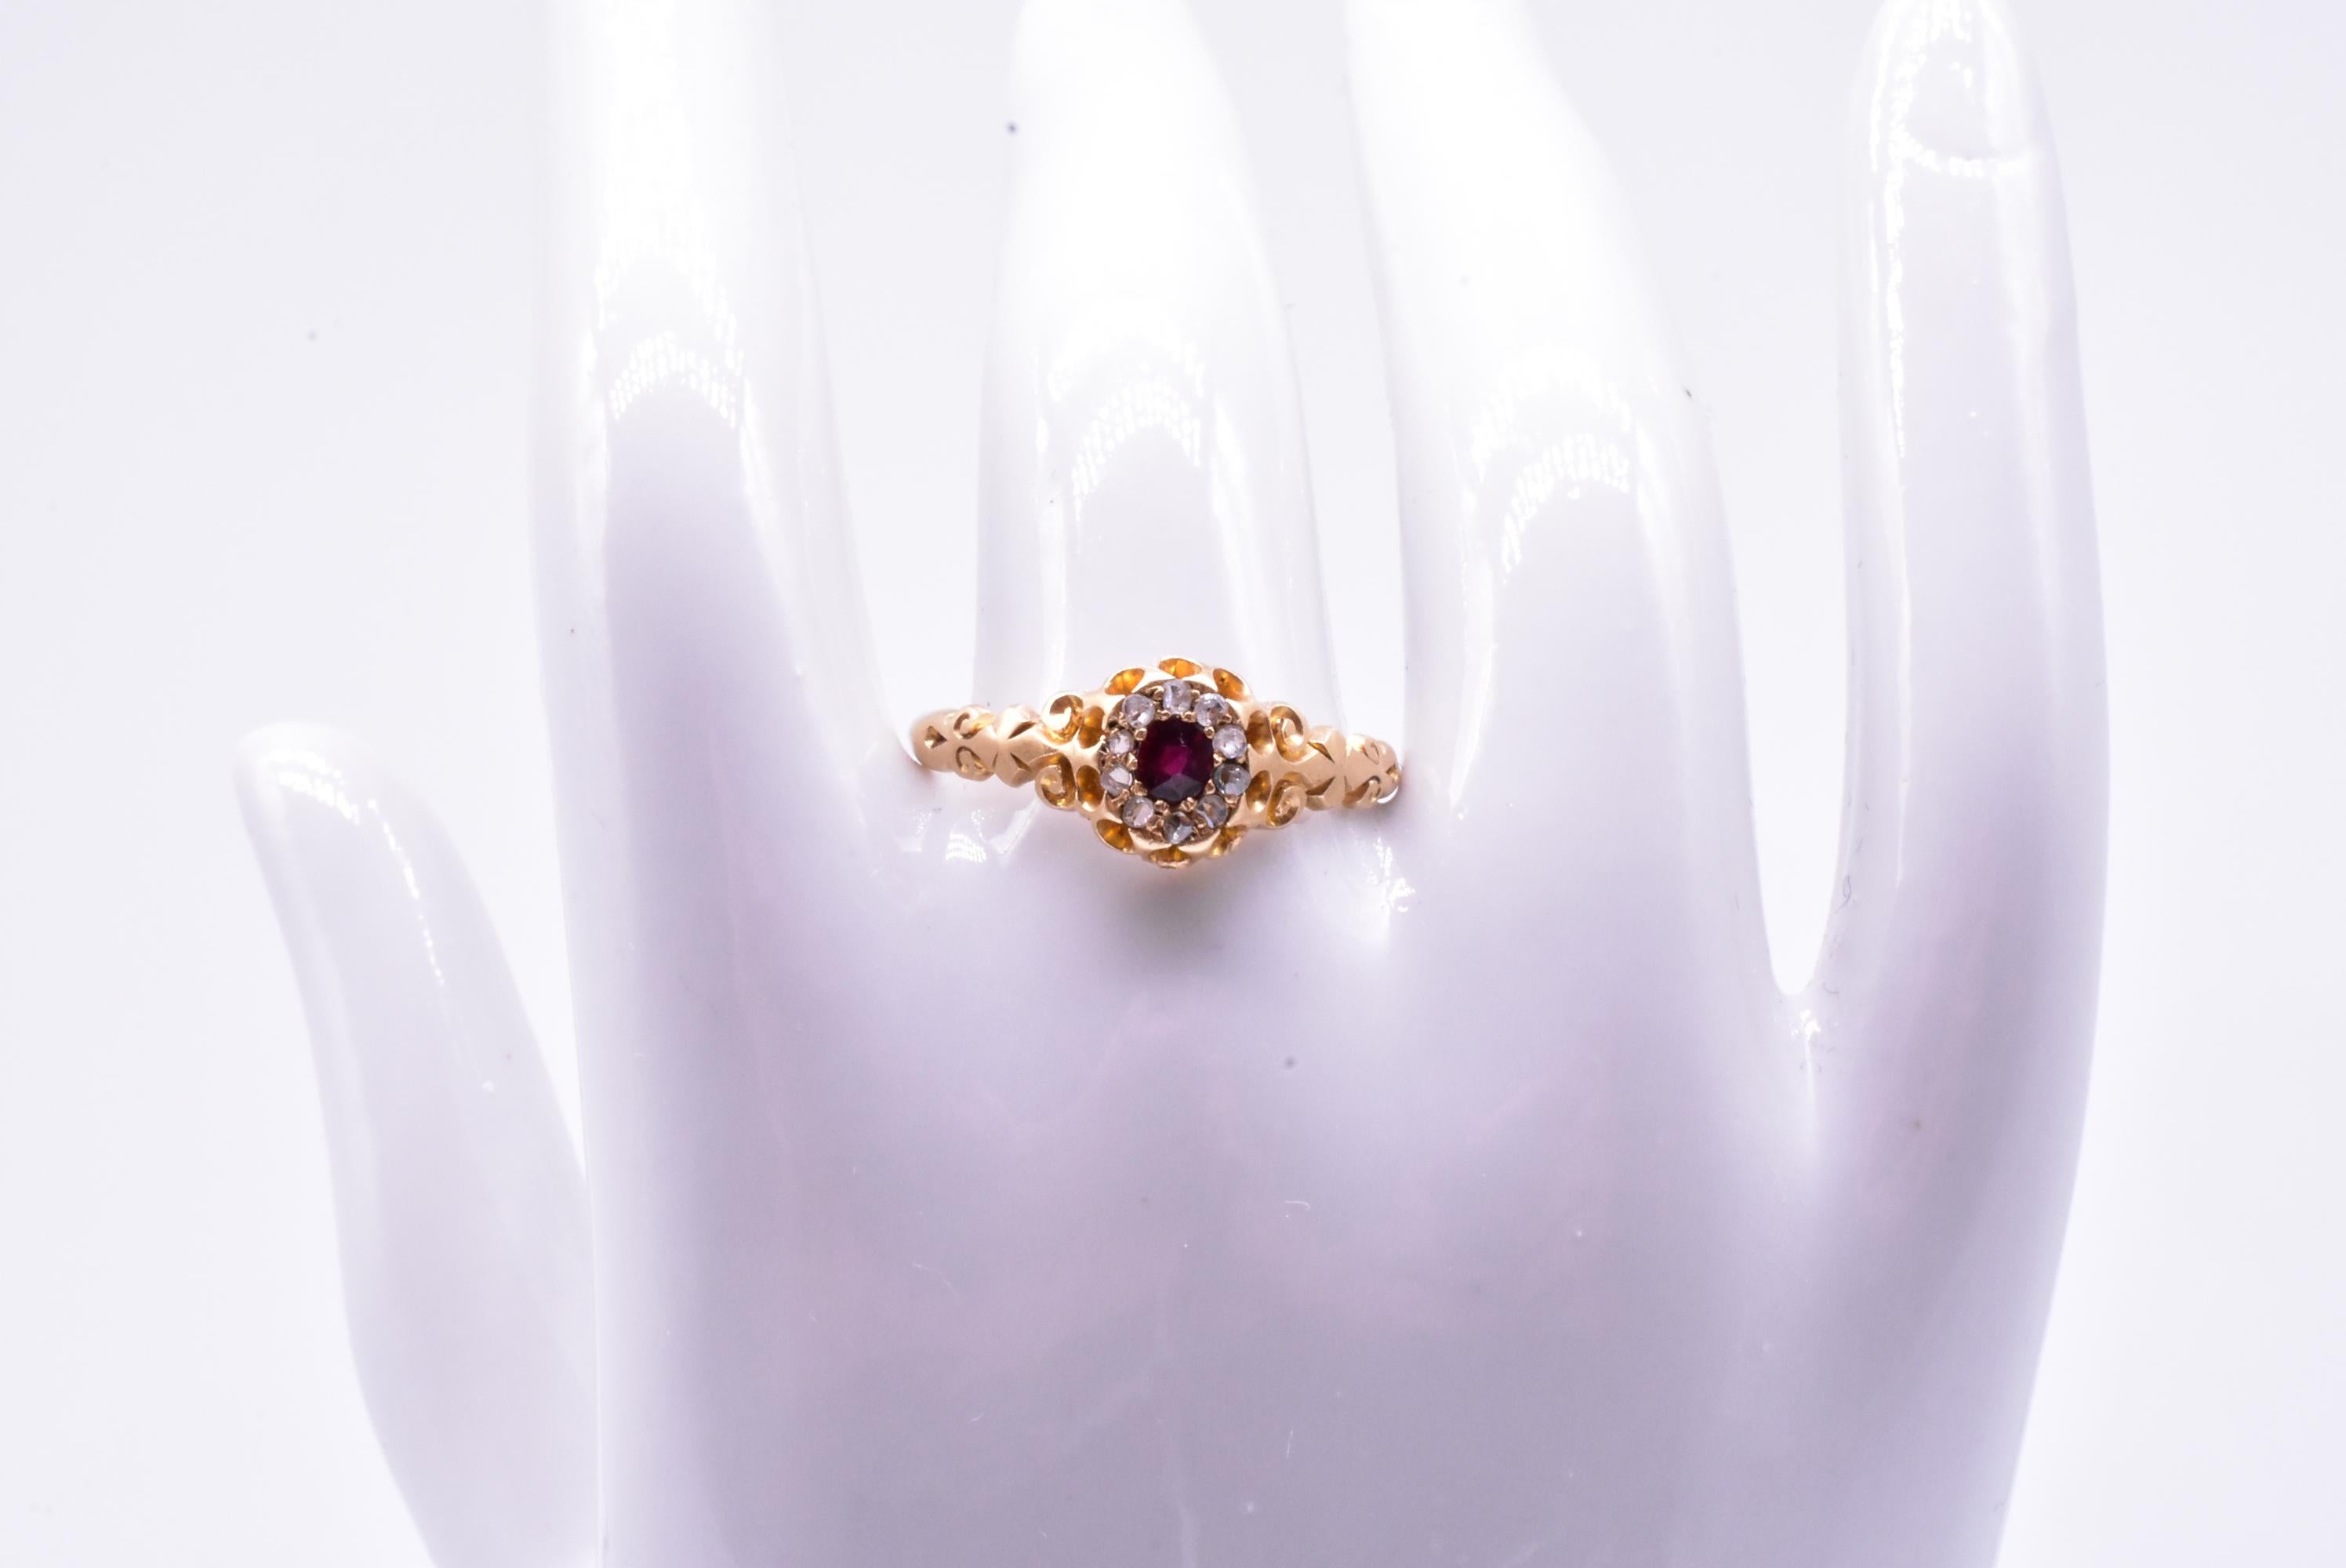 Women's Antique HM Chester 1901 18K Ruby & Diamond Ring w Decorative Shoulders and Halo